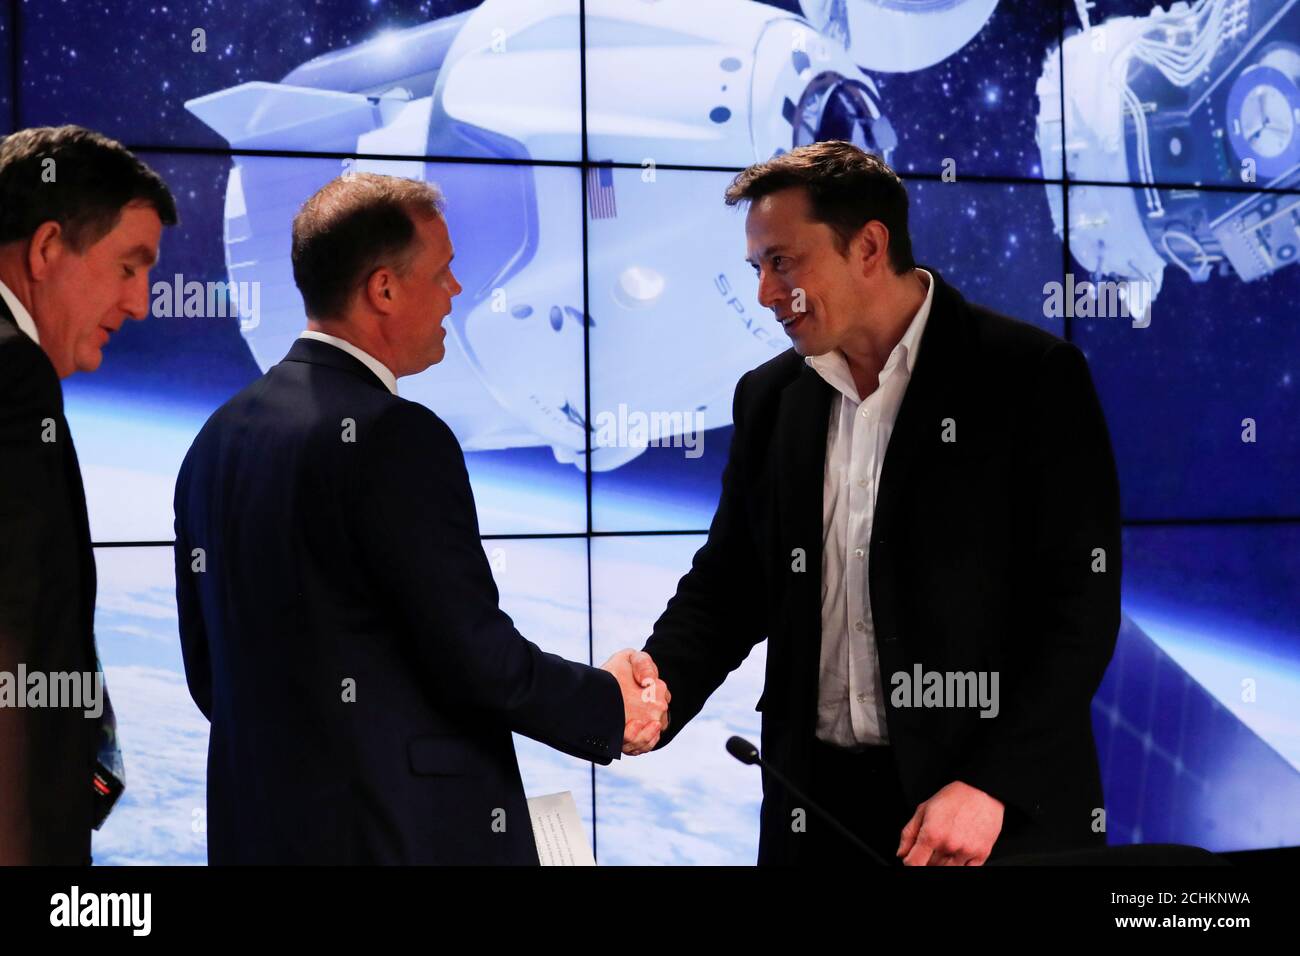 SpaceX founder Elon Musk (R) shakes hands with NASA Administrator Jim Bridenstine at a post-launch news conference after a SpaceX Falcon 9 rocket, carrying the Crew Dragon spacecraft, lifted off on an uncrewed test flight to the International Space Station from the Kennedy Space Center in Cape Canaveral, Florida, U.S., March 2, 2019. REUTERS/Mike Blake Stock Photo